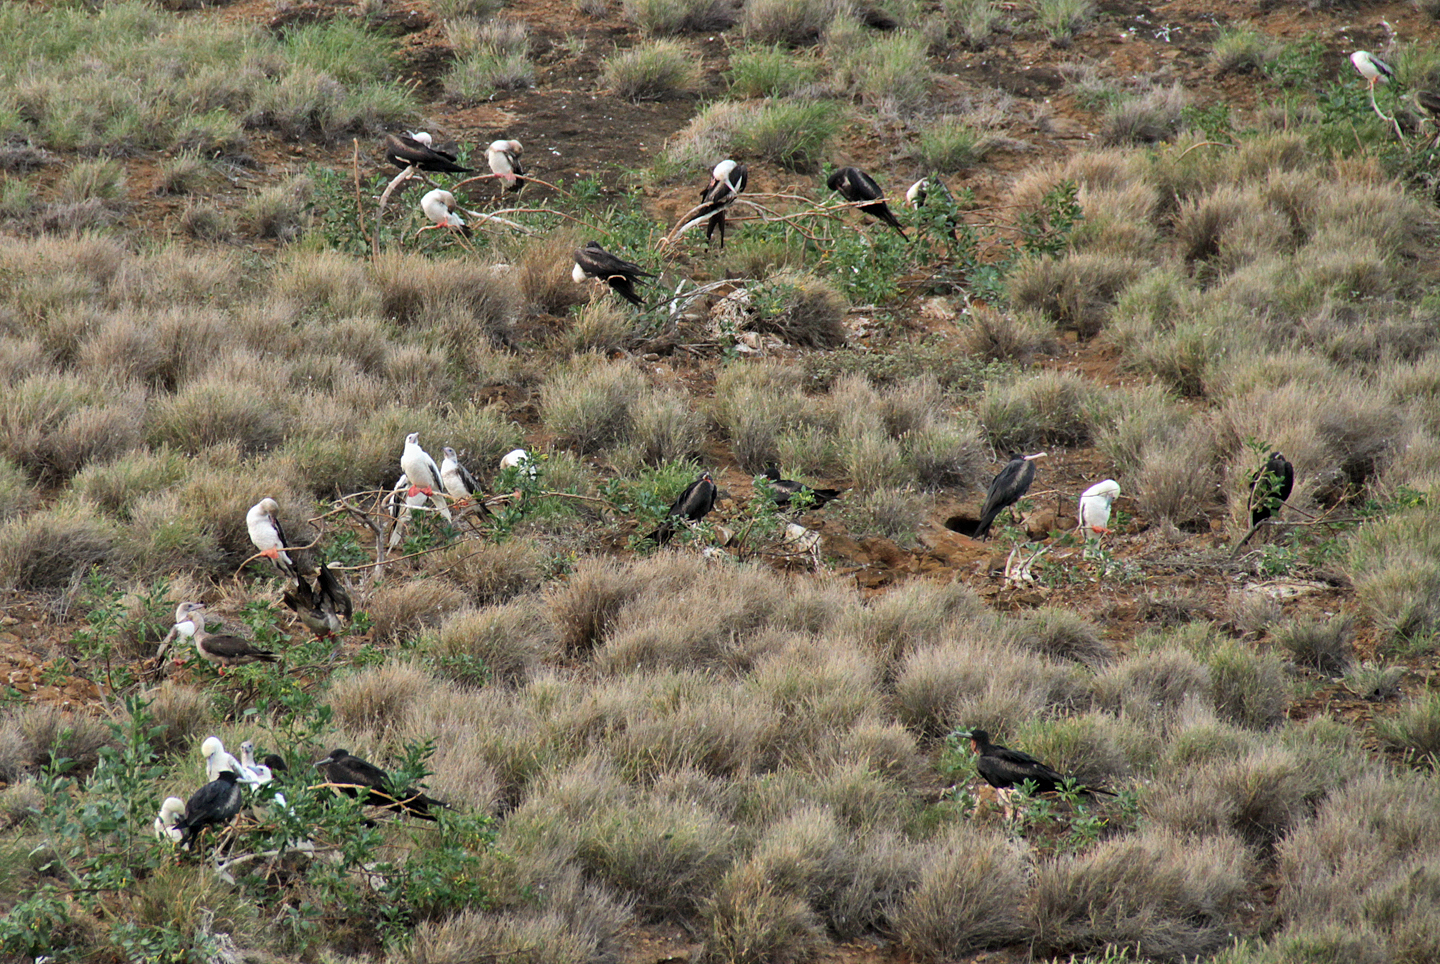 Red-footed Boobies (16 in this photo) roosting at Molokini along with Great Frigatebirds. Molokini Islet. Aug. 12, 2019.